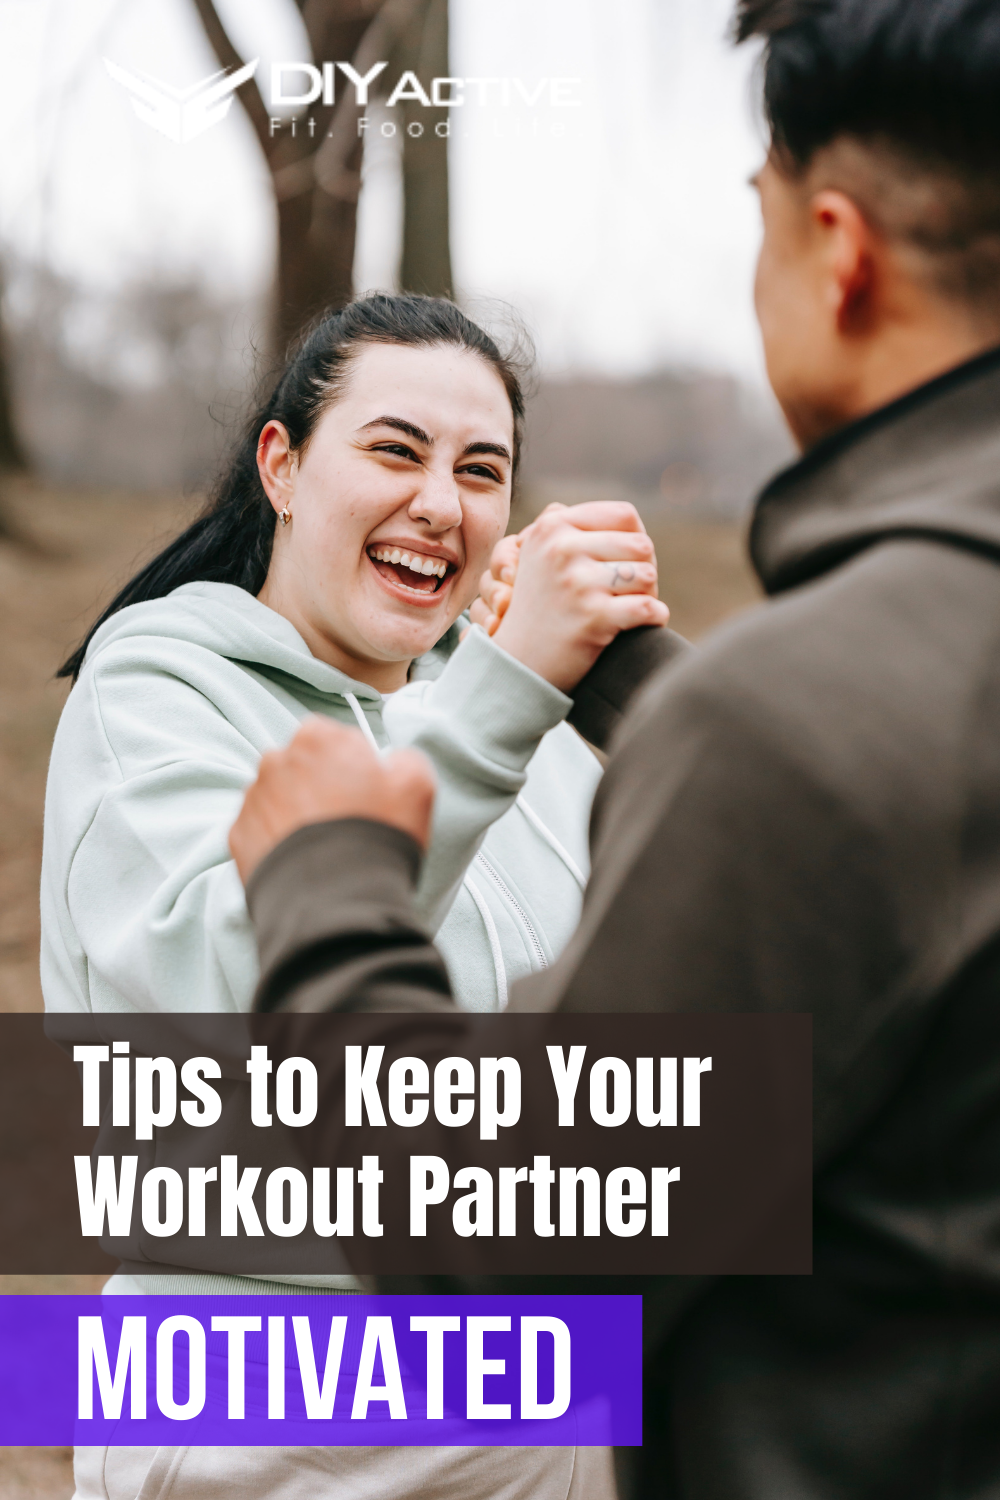 Tips to Keep You and Your Workout Partner Motivated